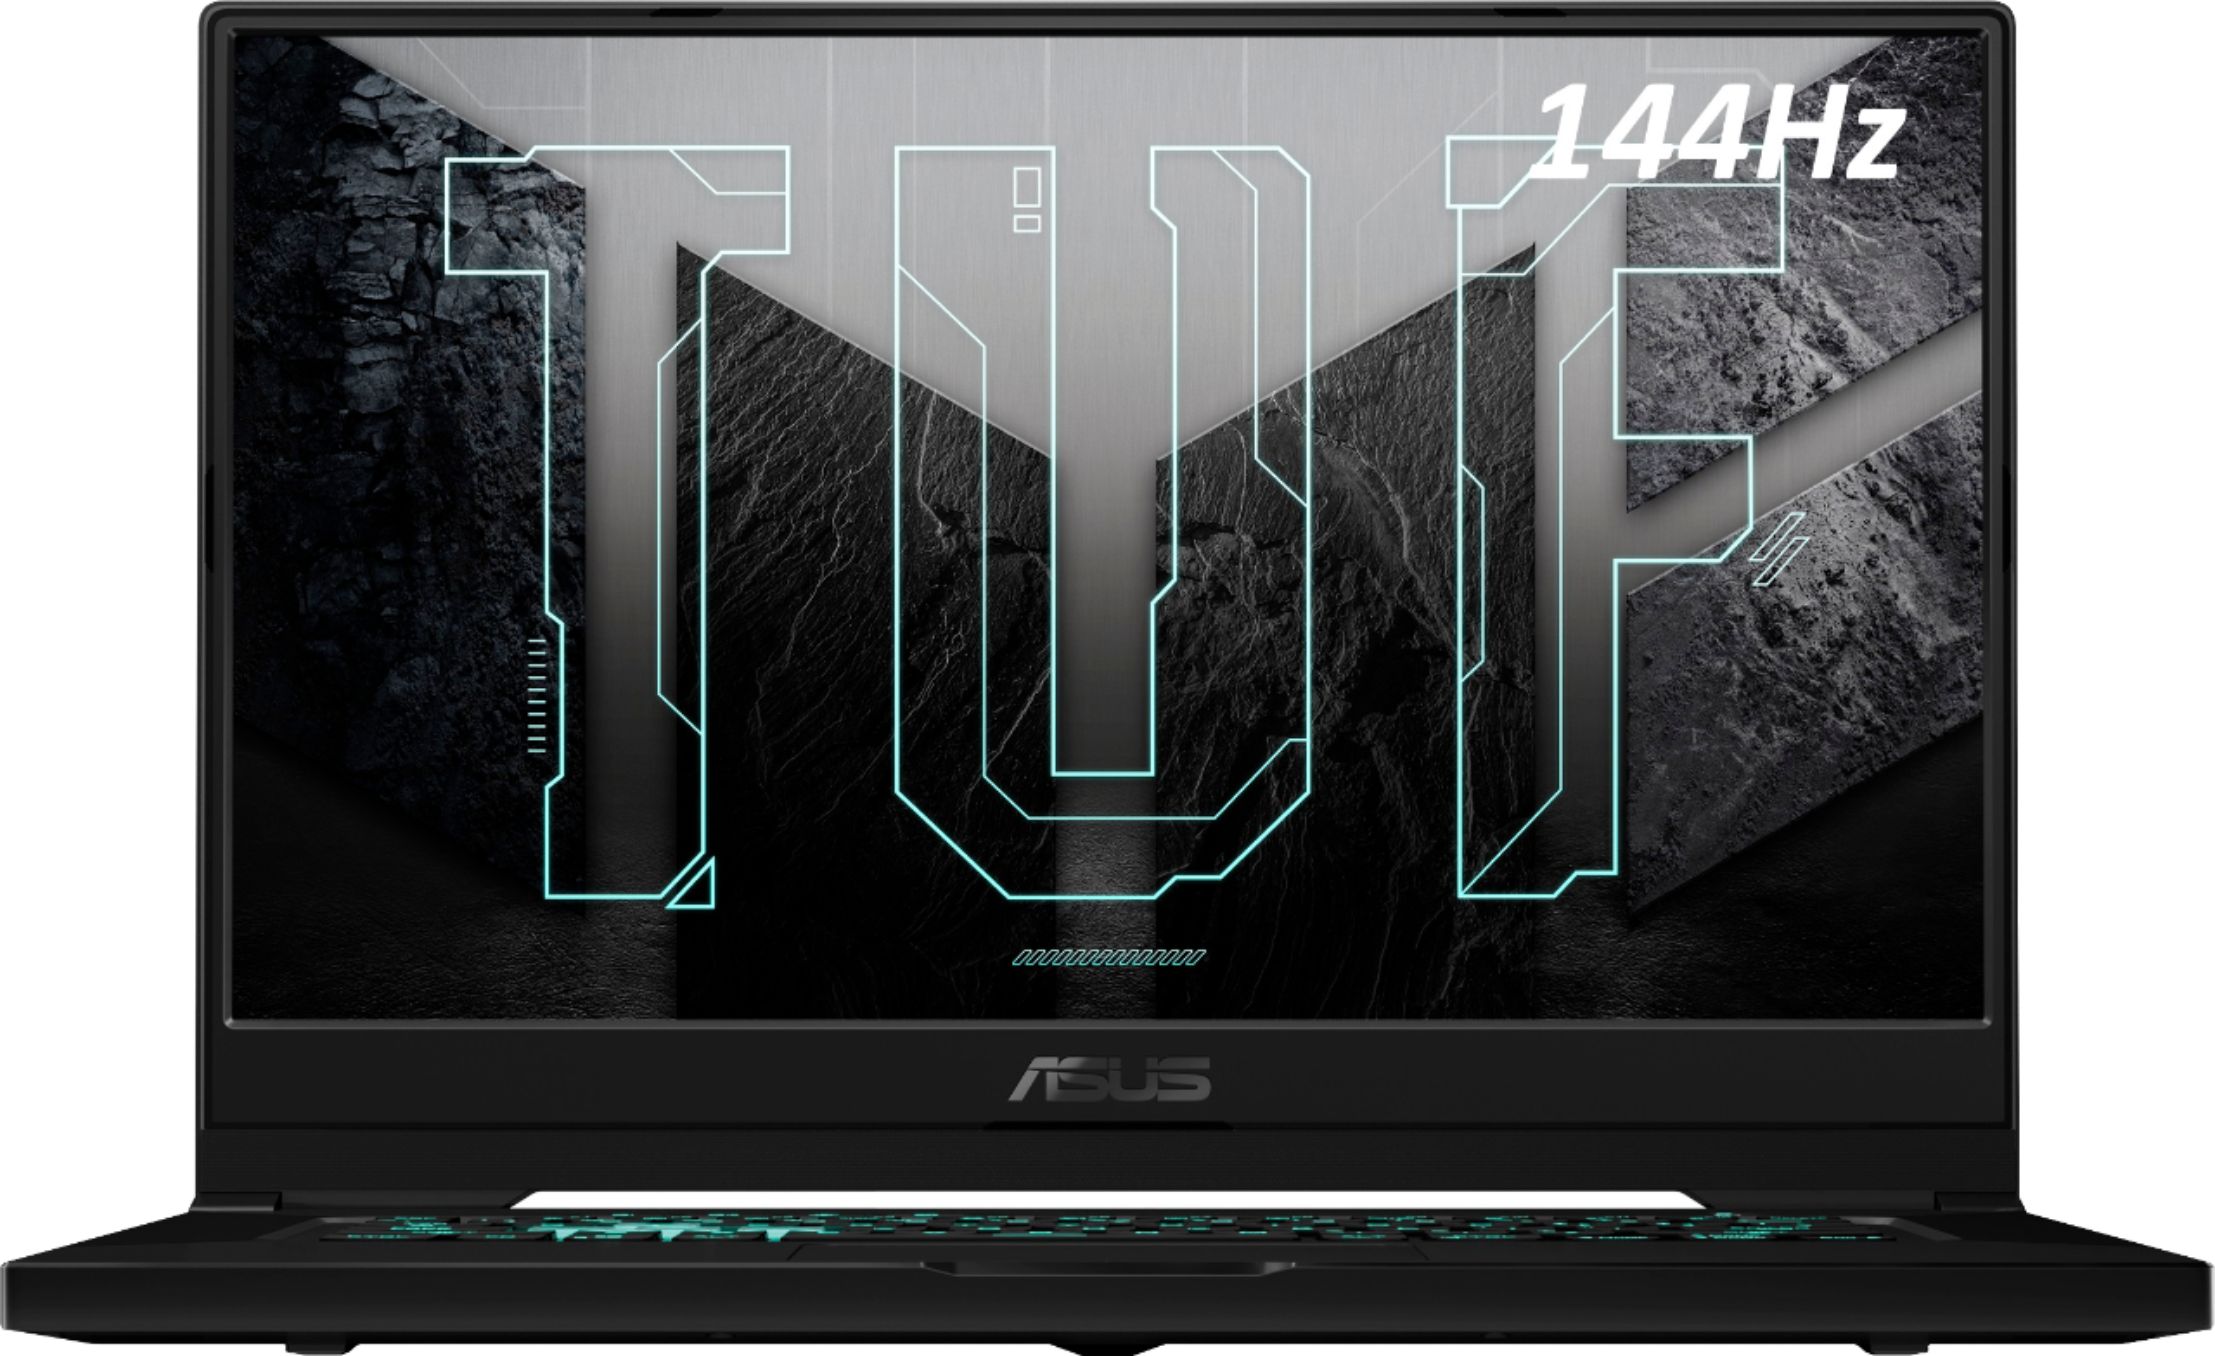 This Asus TUF Dash F15 laptop with GeForce RTX 3060 graphics, 11th generation Core i7 CPU and 16 GB RAM is up to 1100 USD